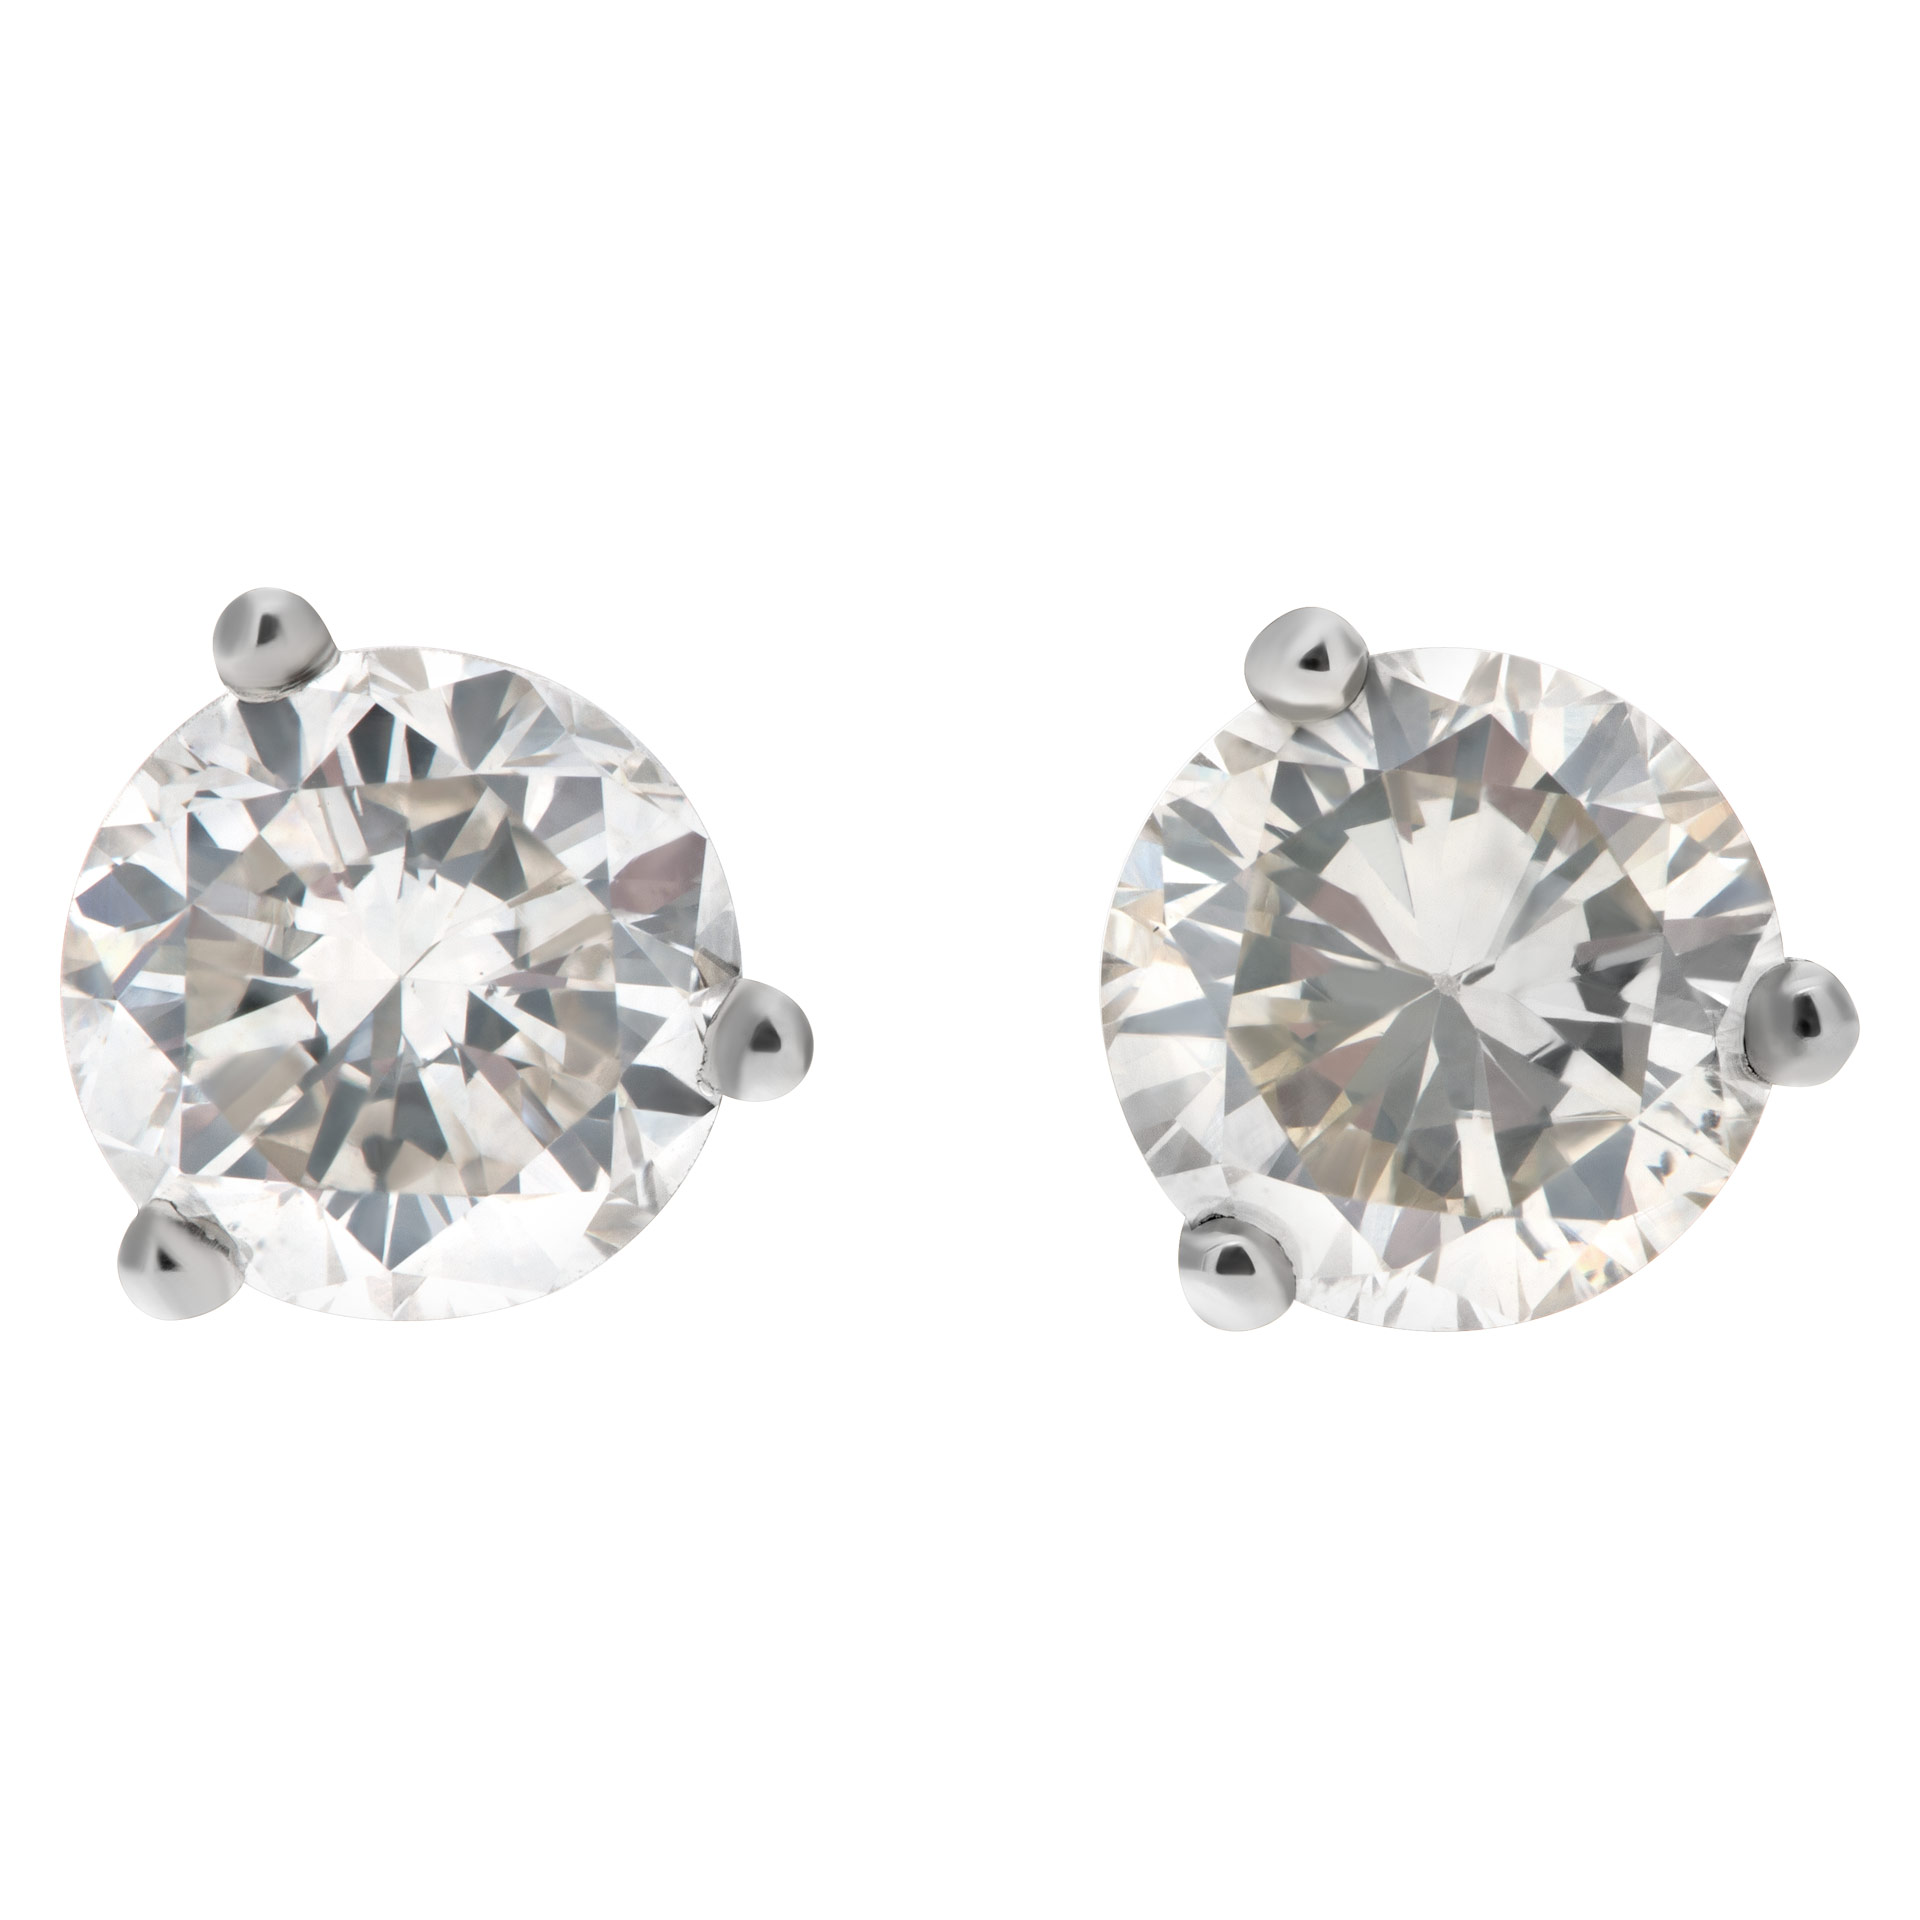 GIA certified diamond studs total 1.07 carats (S to T Range Light Brown Color, SI2 Clarity) image 1